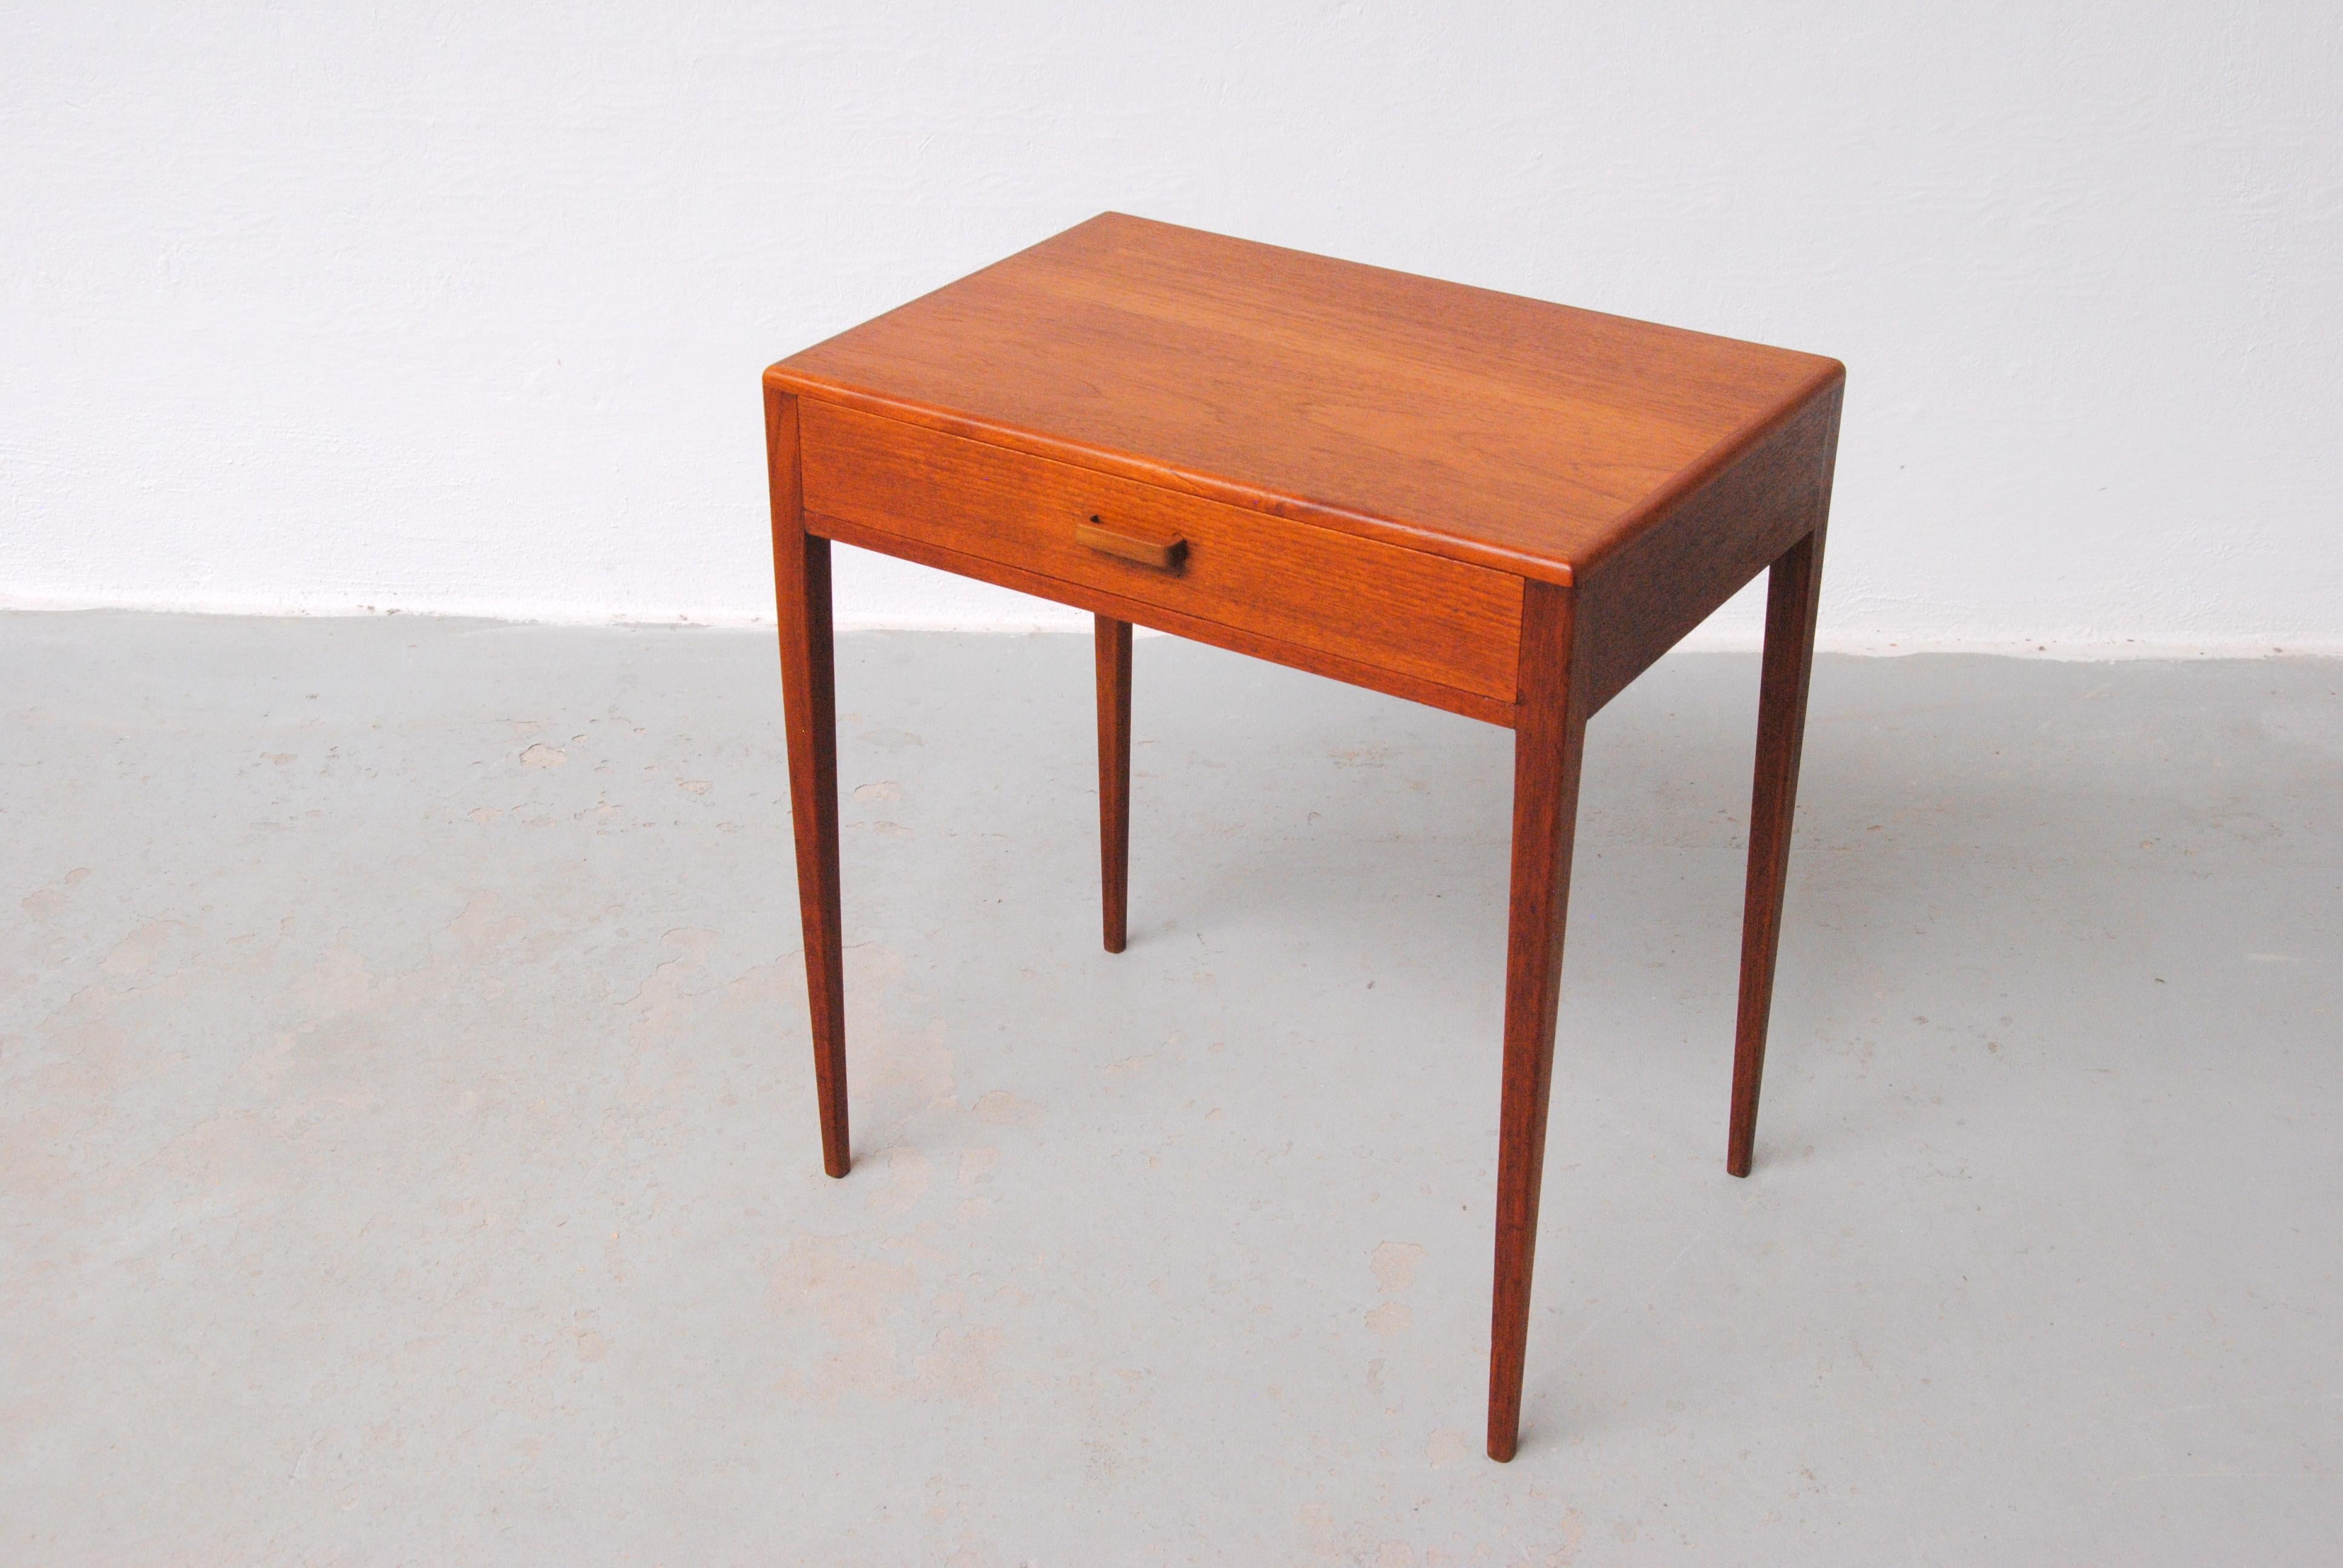 1960's Fully restored Danish teak side table.

The simple yet very elegant designed side table with it's small drawer with sections for your small pieces features loads of details - nothing from the well designed and crafted legs, the rounded edges